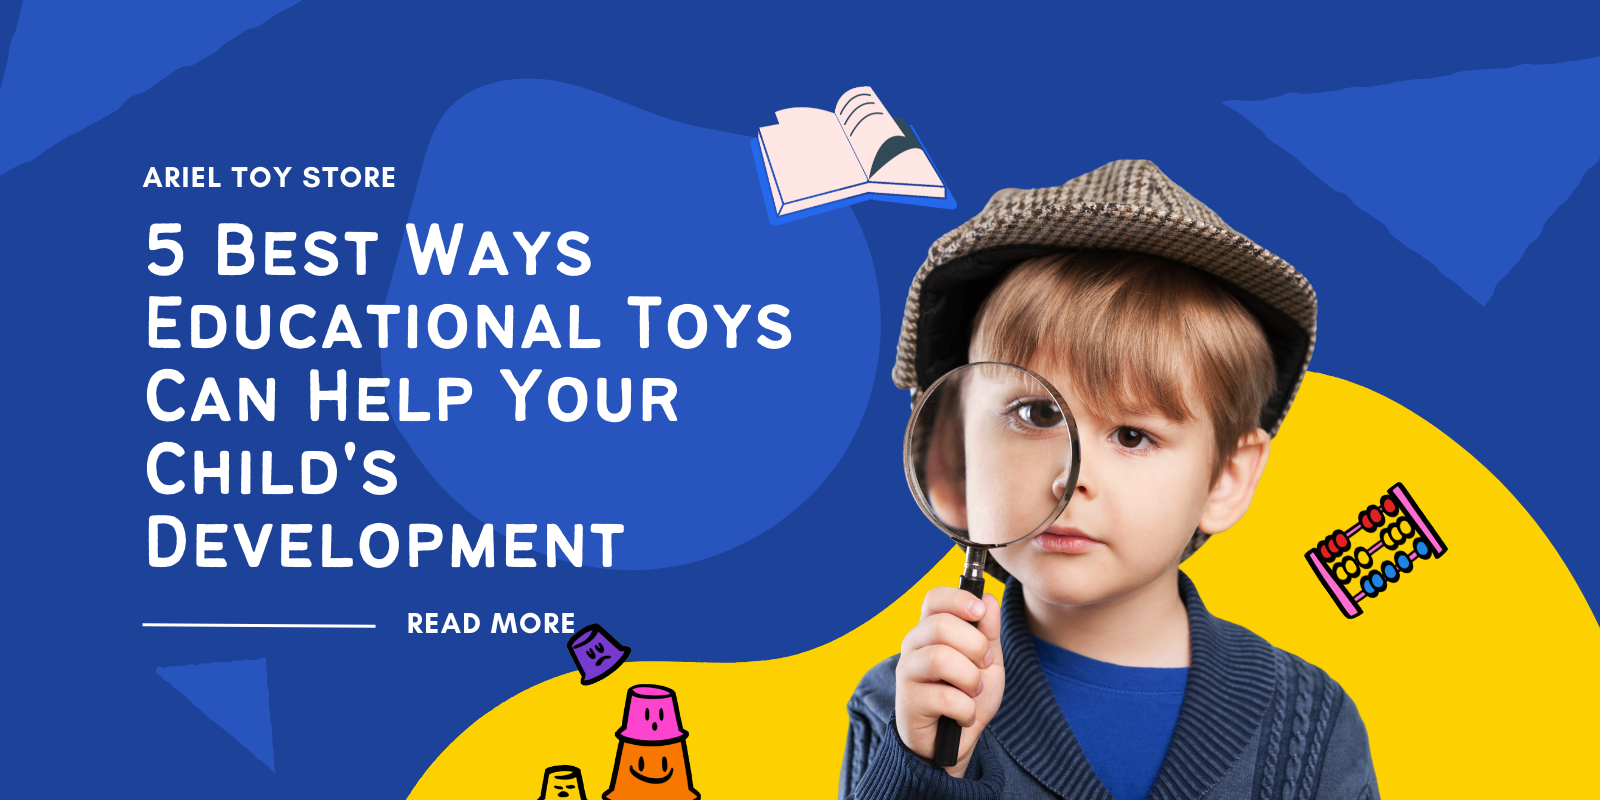 5 Best Ways Educational Toys Can Help Your Child's Development